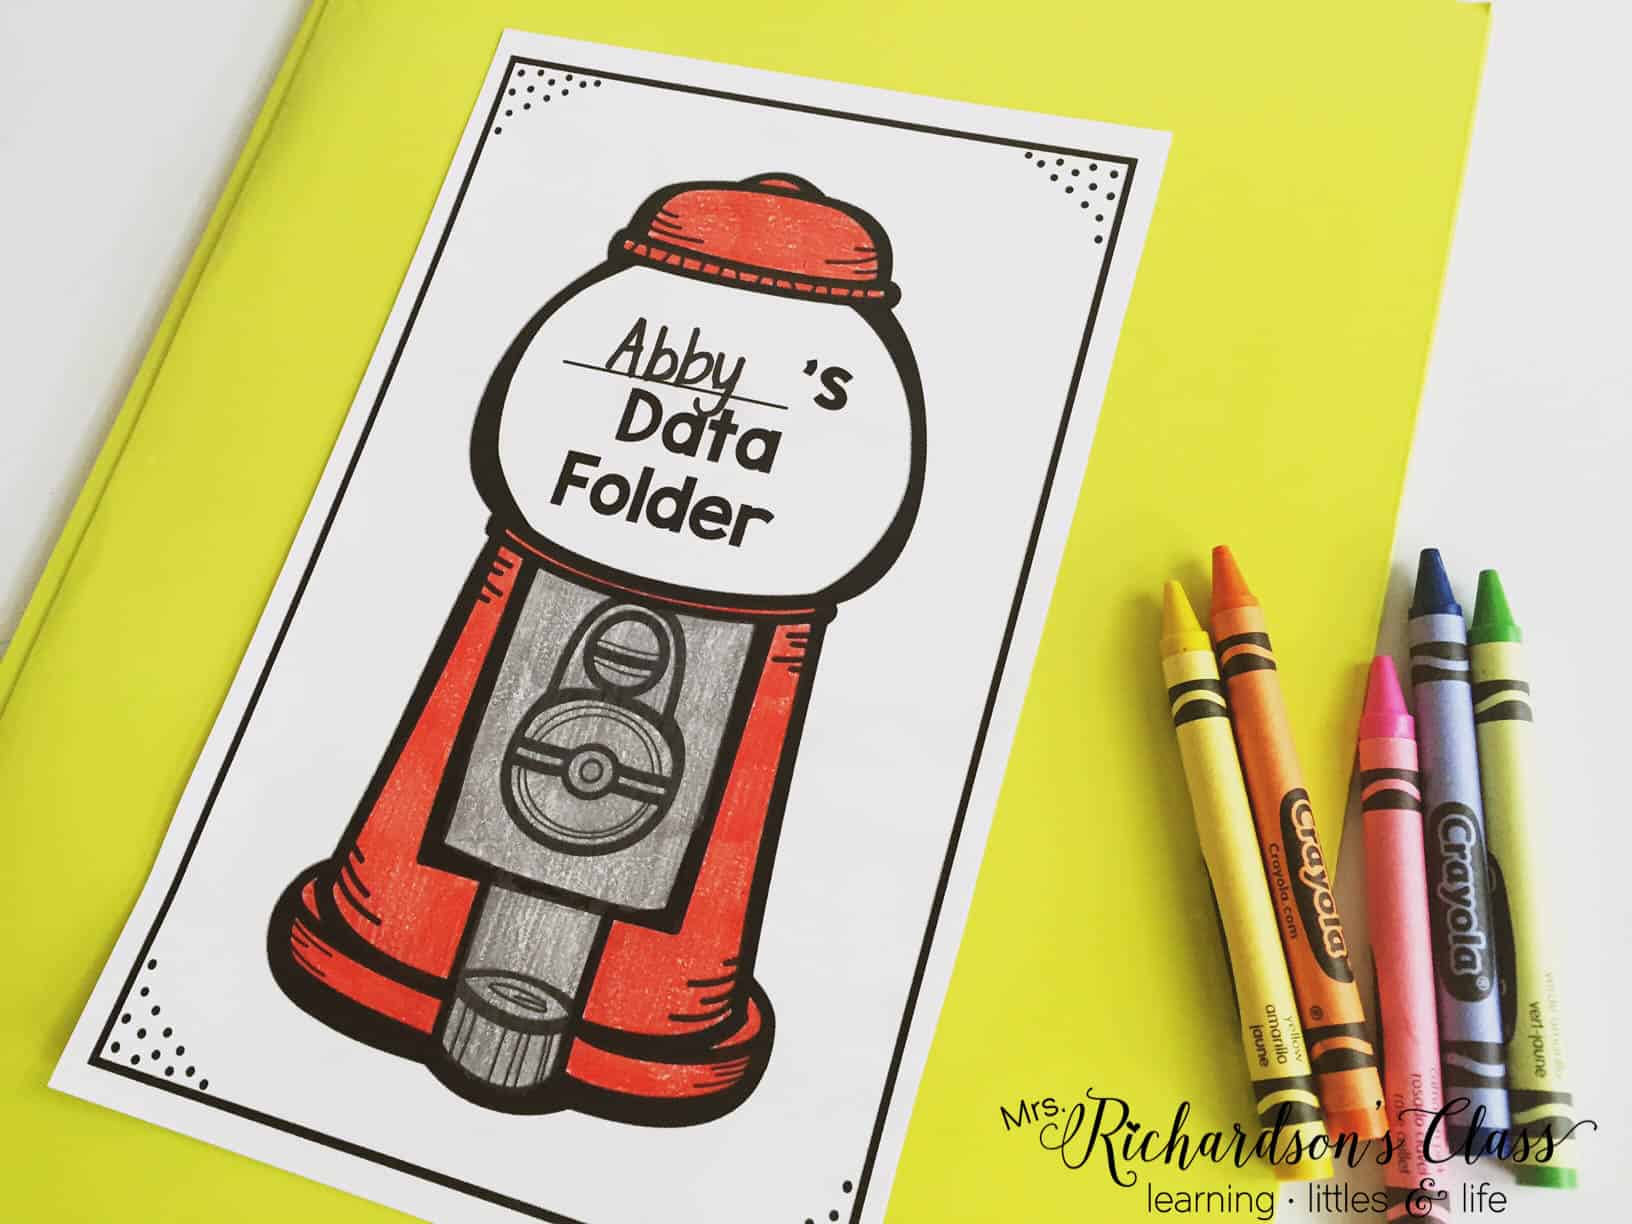 Kindergarten sight word data tracking doesn't have to be tricky! See how this teacher made it easy for herself and engaging for students!